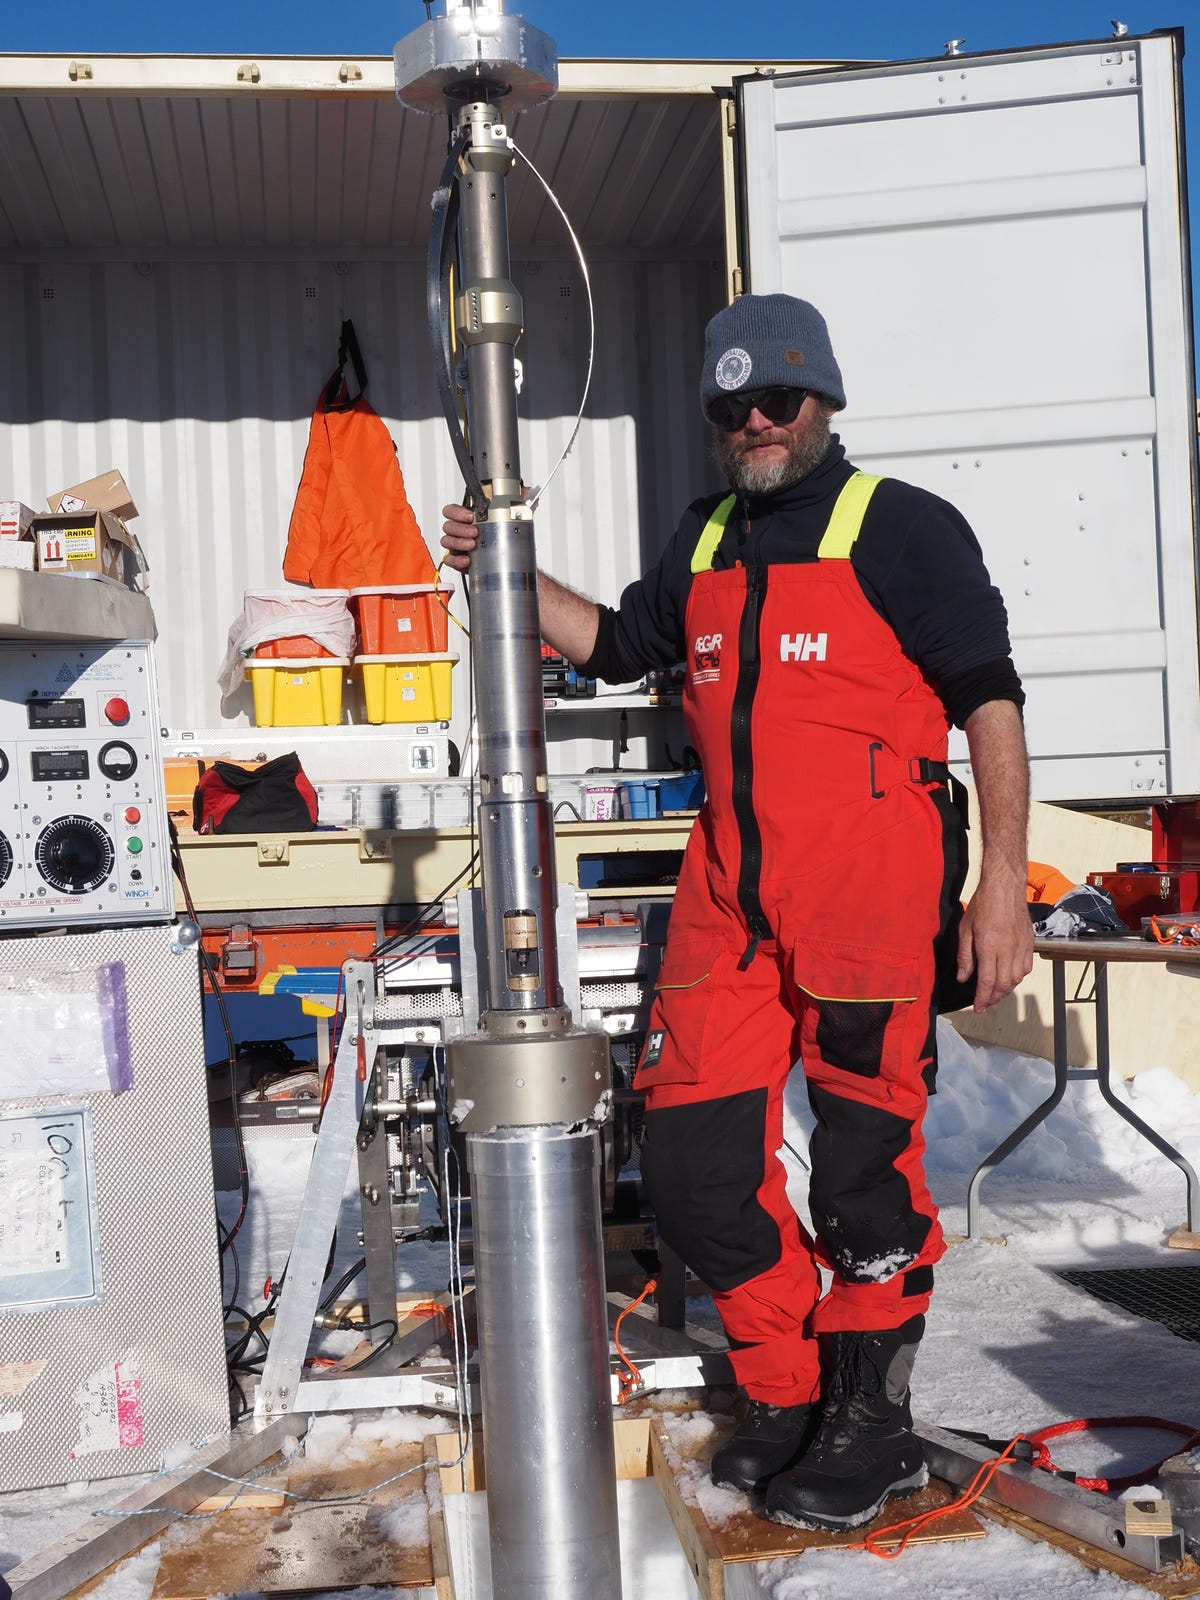 A man in red overalls and a black shirt, black sunglasses and a grey beanie stands with a large ice-coring drill.